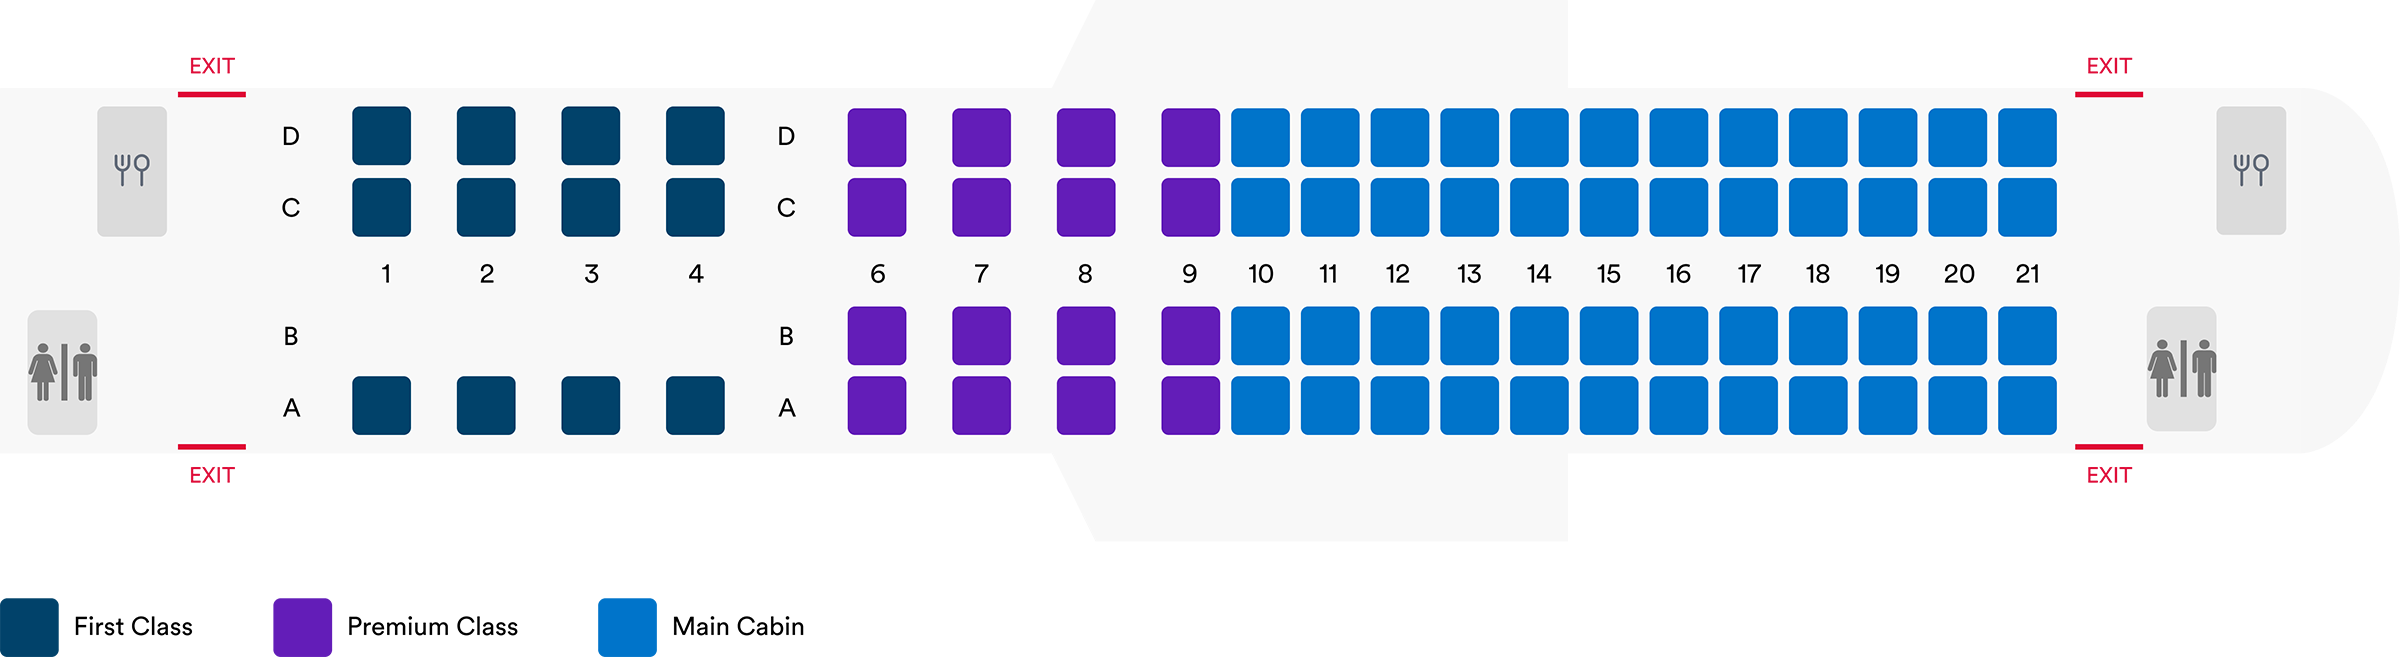 Seatmap of the Honoring Those Who Serve Embraer 175 Livery